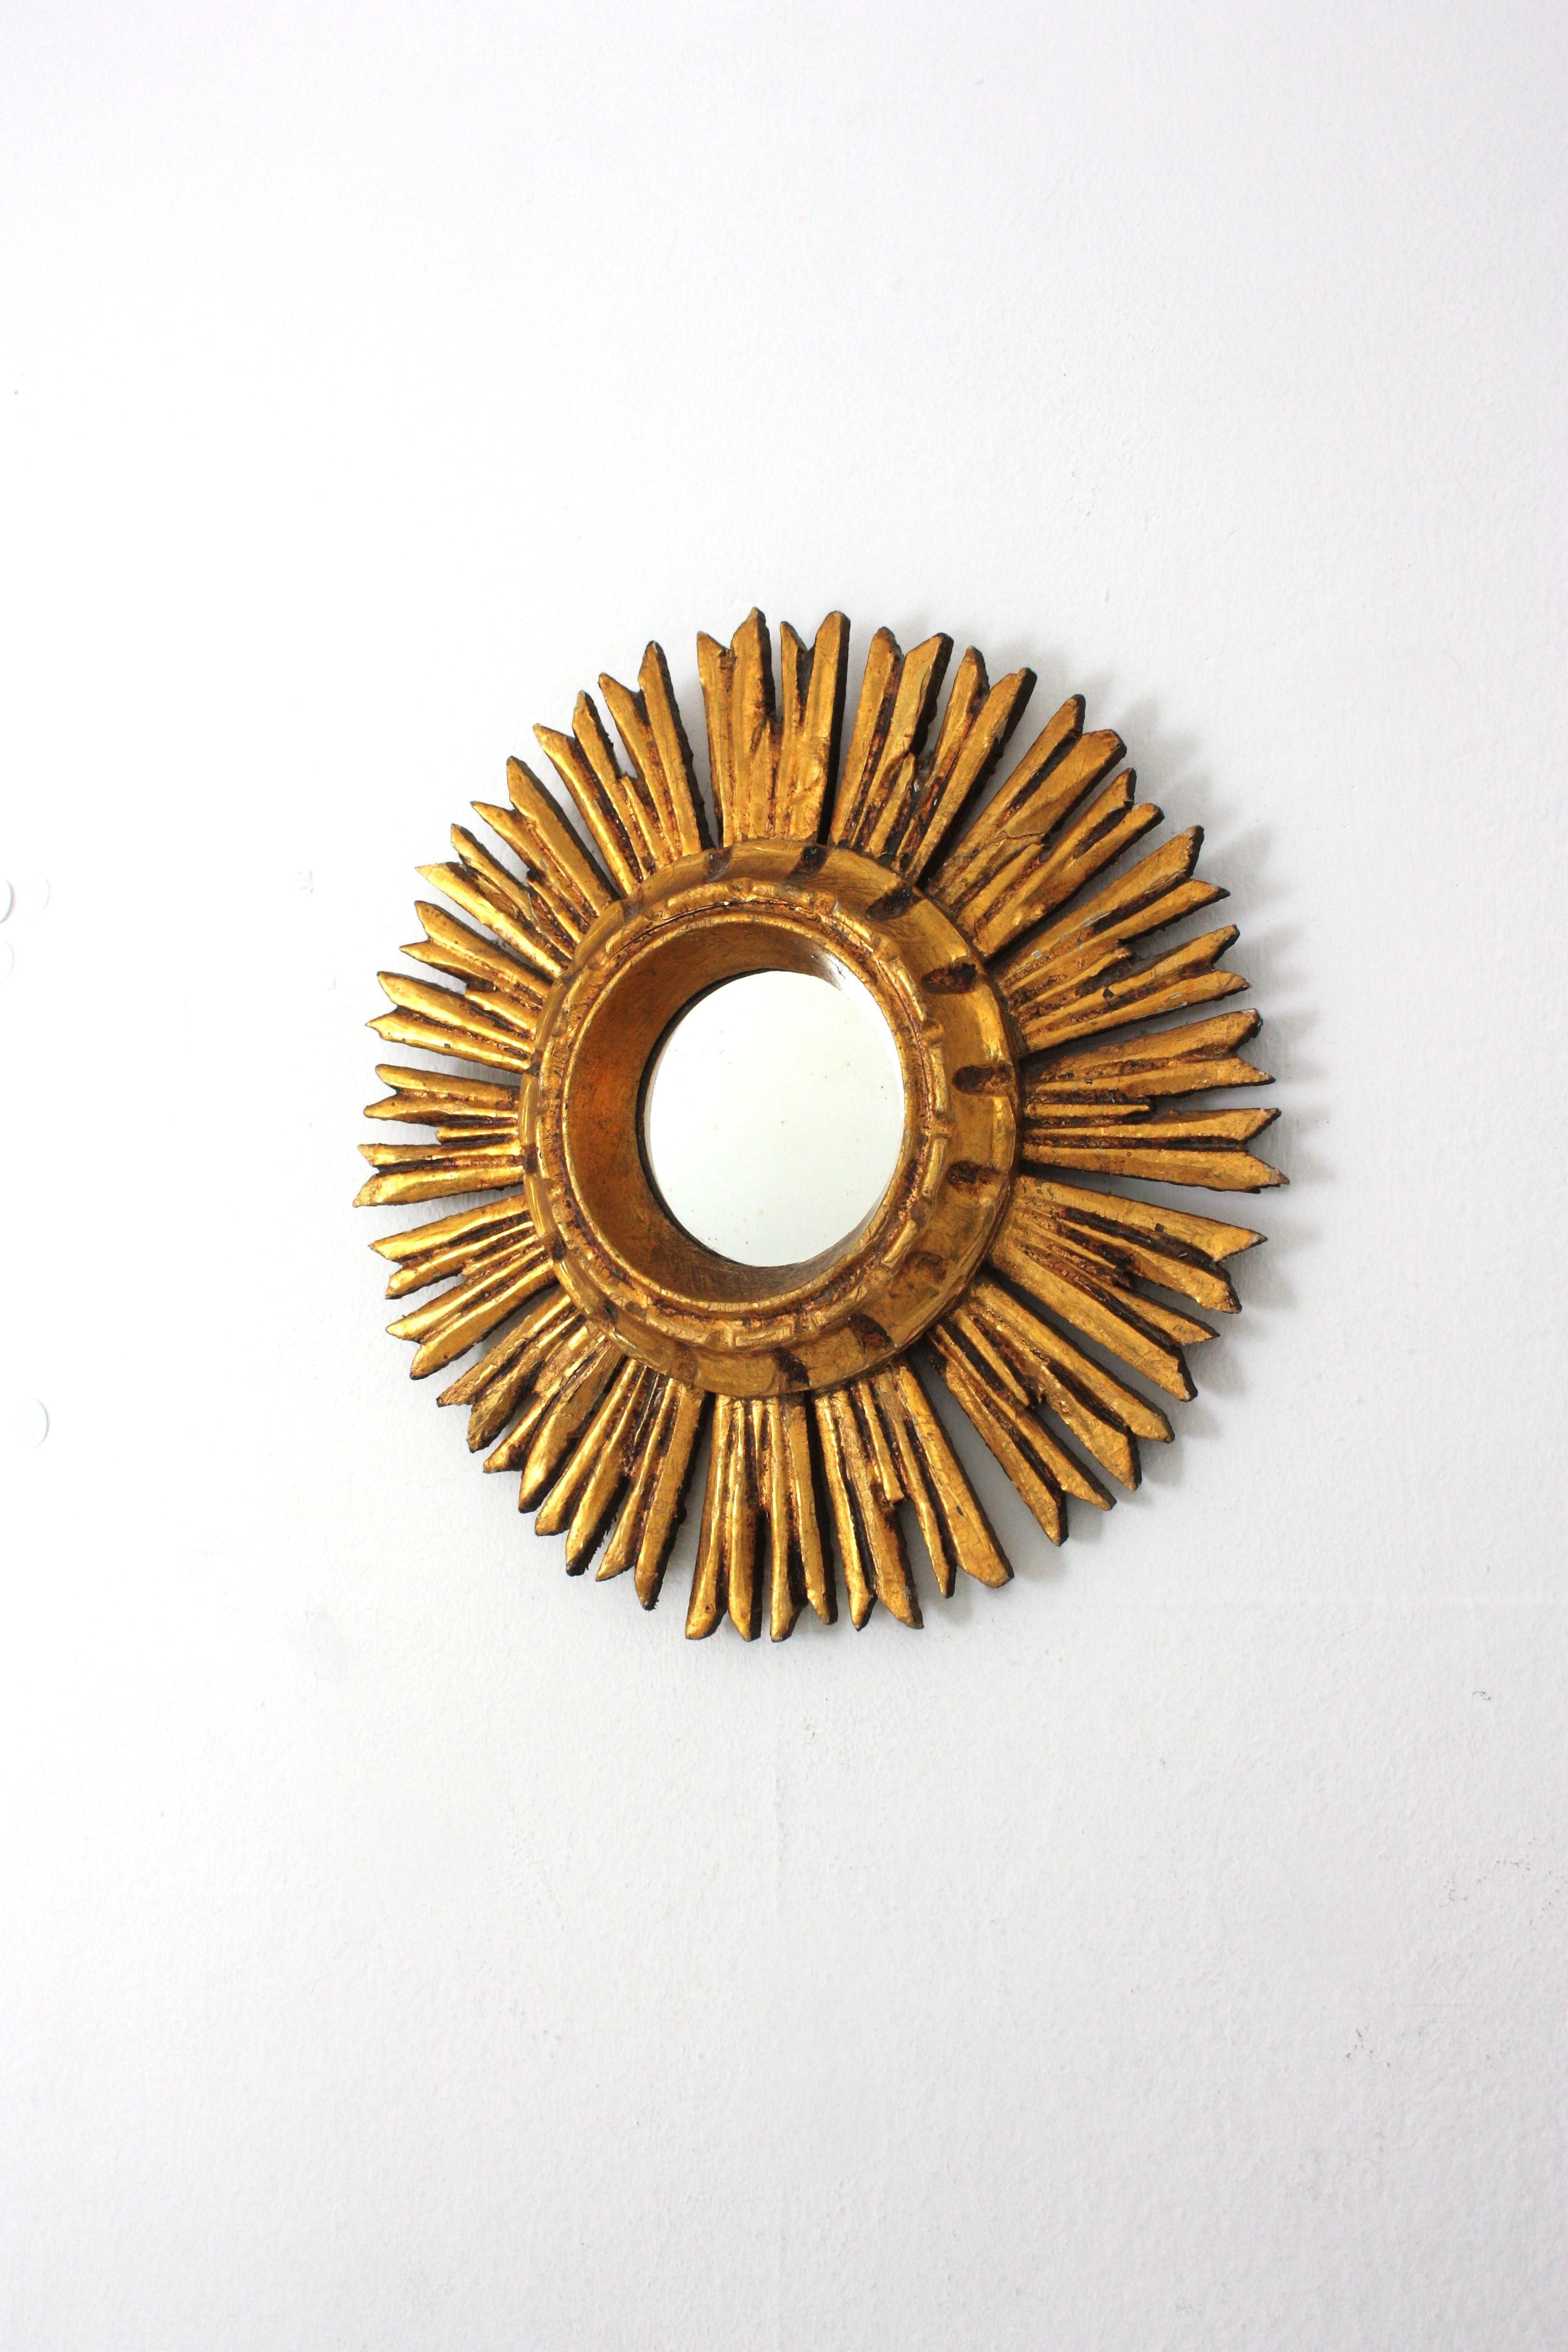 Mini sized carved giltwood convex sunburst mirror, Spain,  1940s
This lovely petite giltwood sunburst mirror with carved frame has a terrific patina and shows it original gold leaf gilding.
Place it alone or as a part of a sunburst mirrors wall